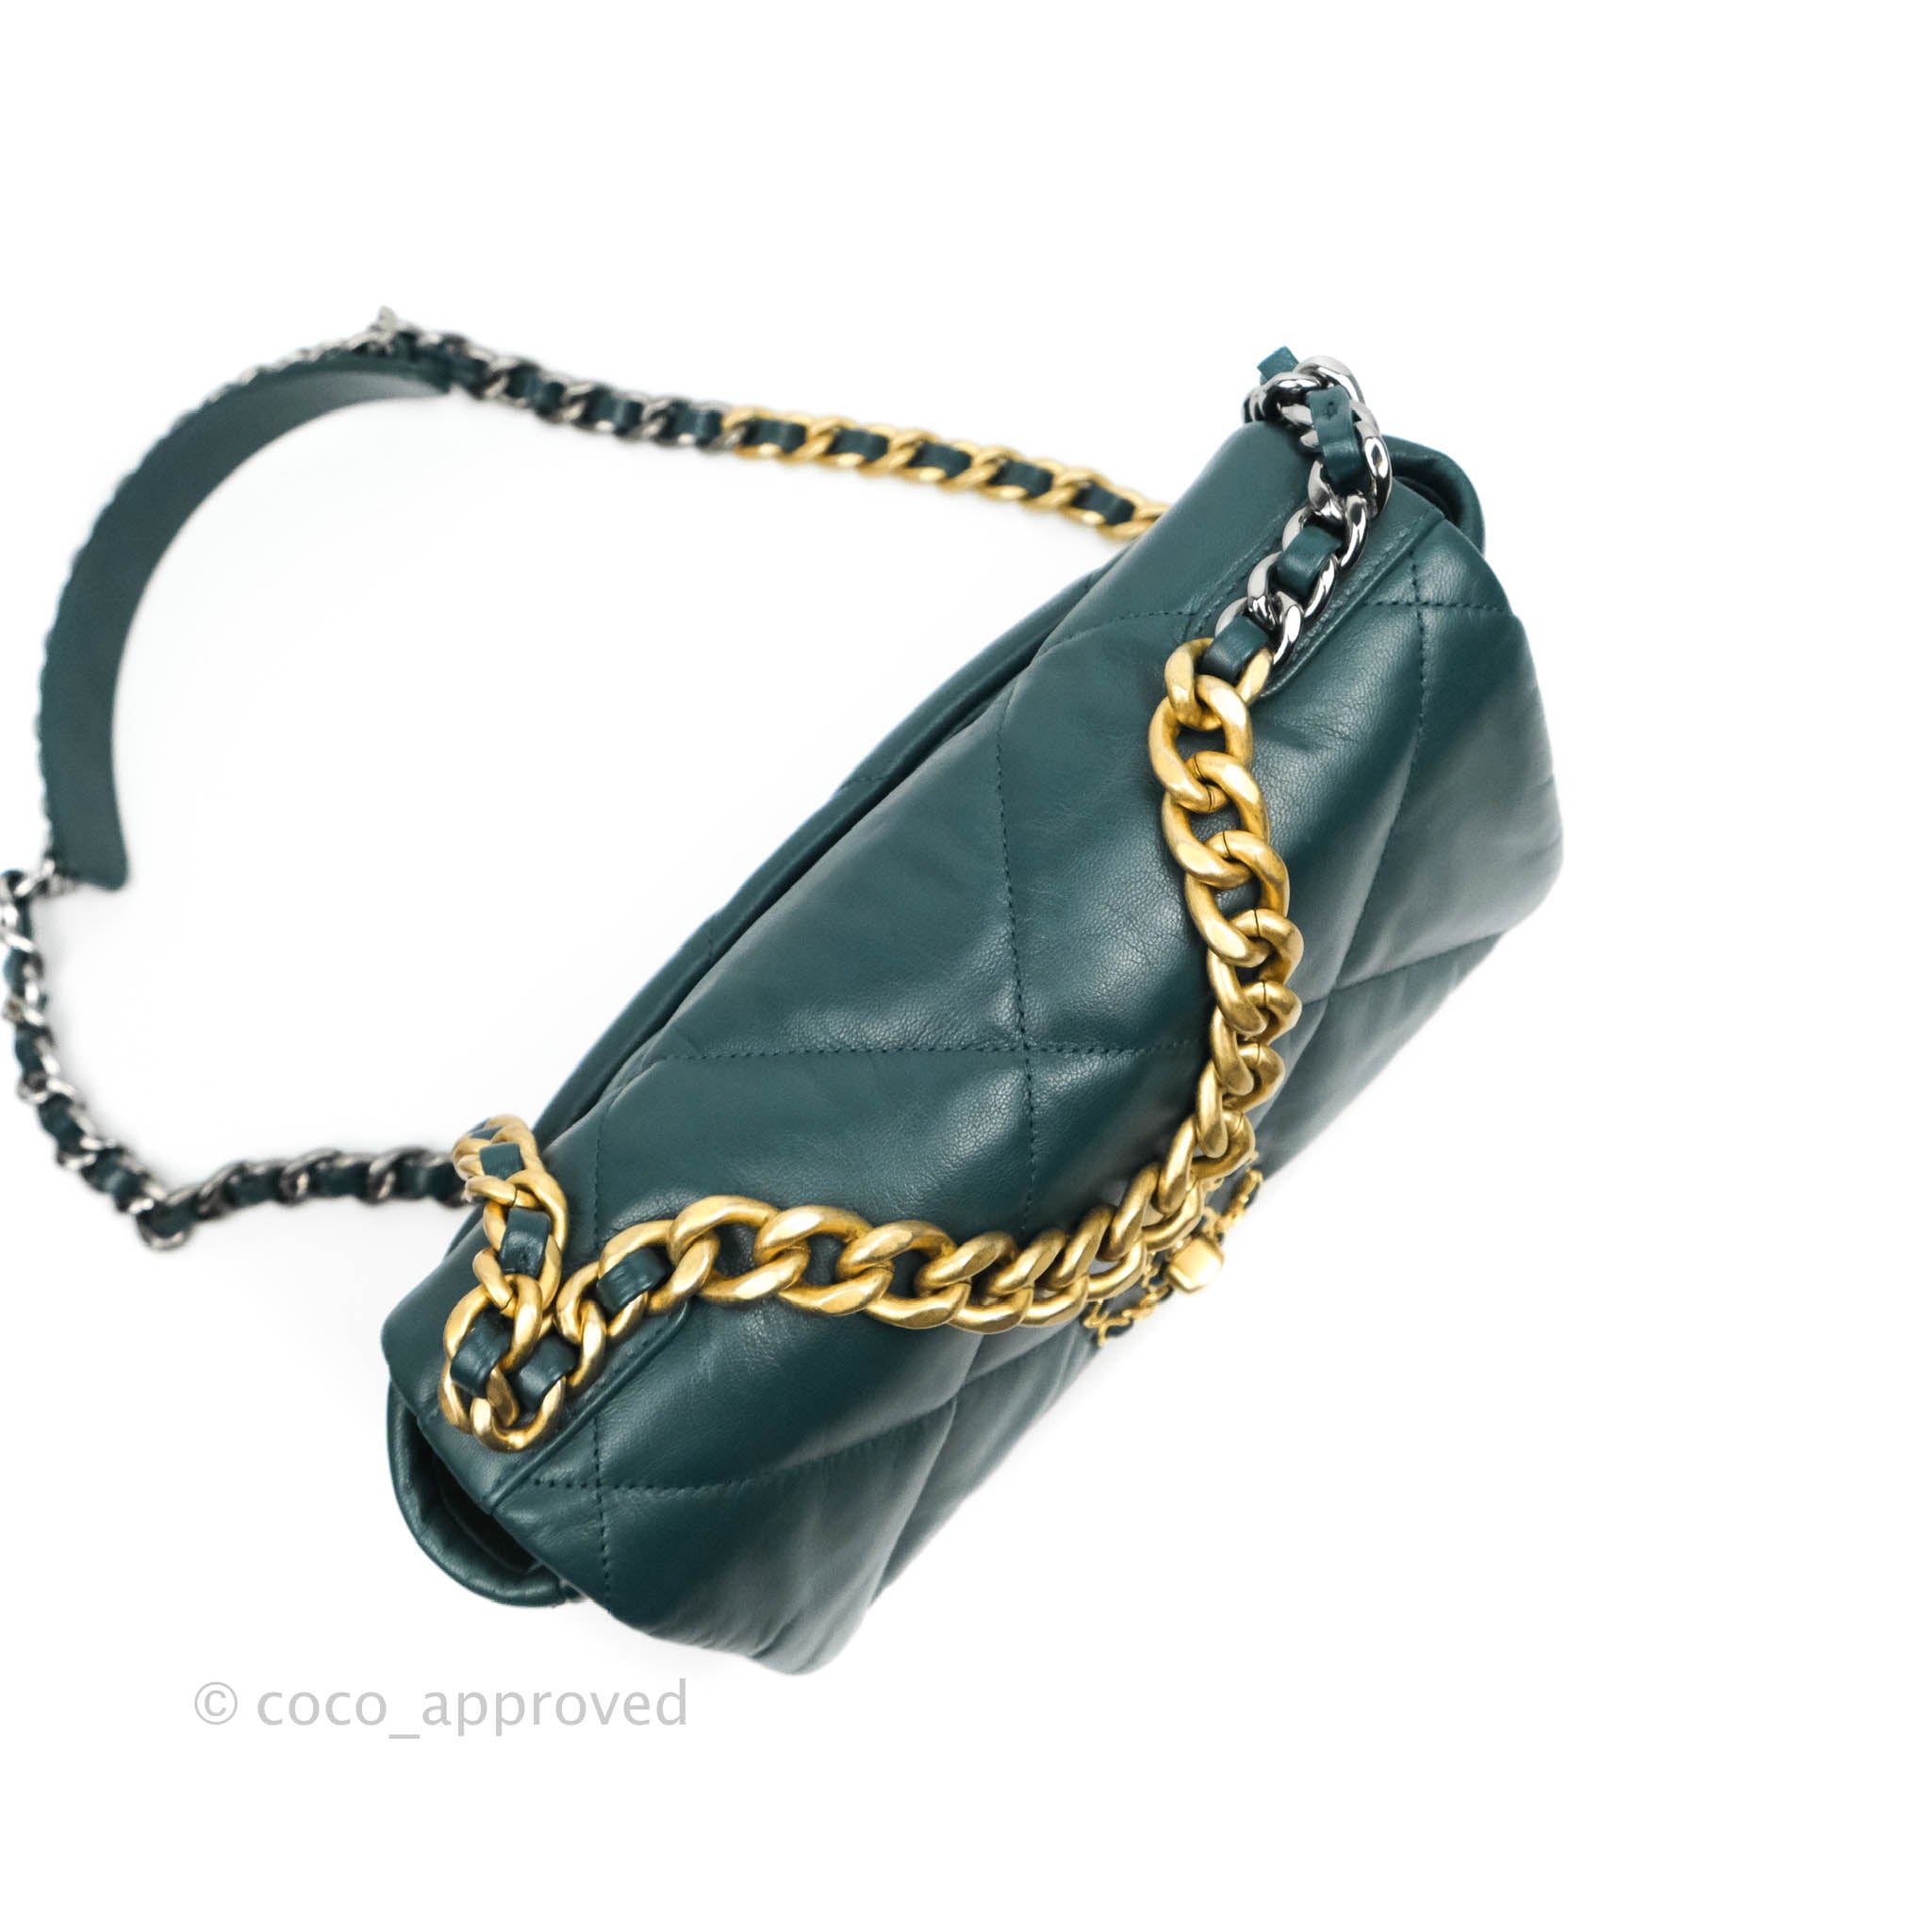 Chanel 19 Small Green Mixed Hardware – Coco Approved Studio